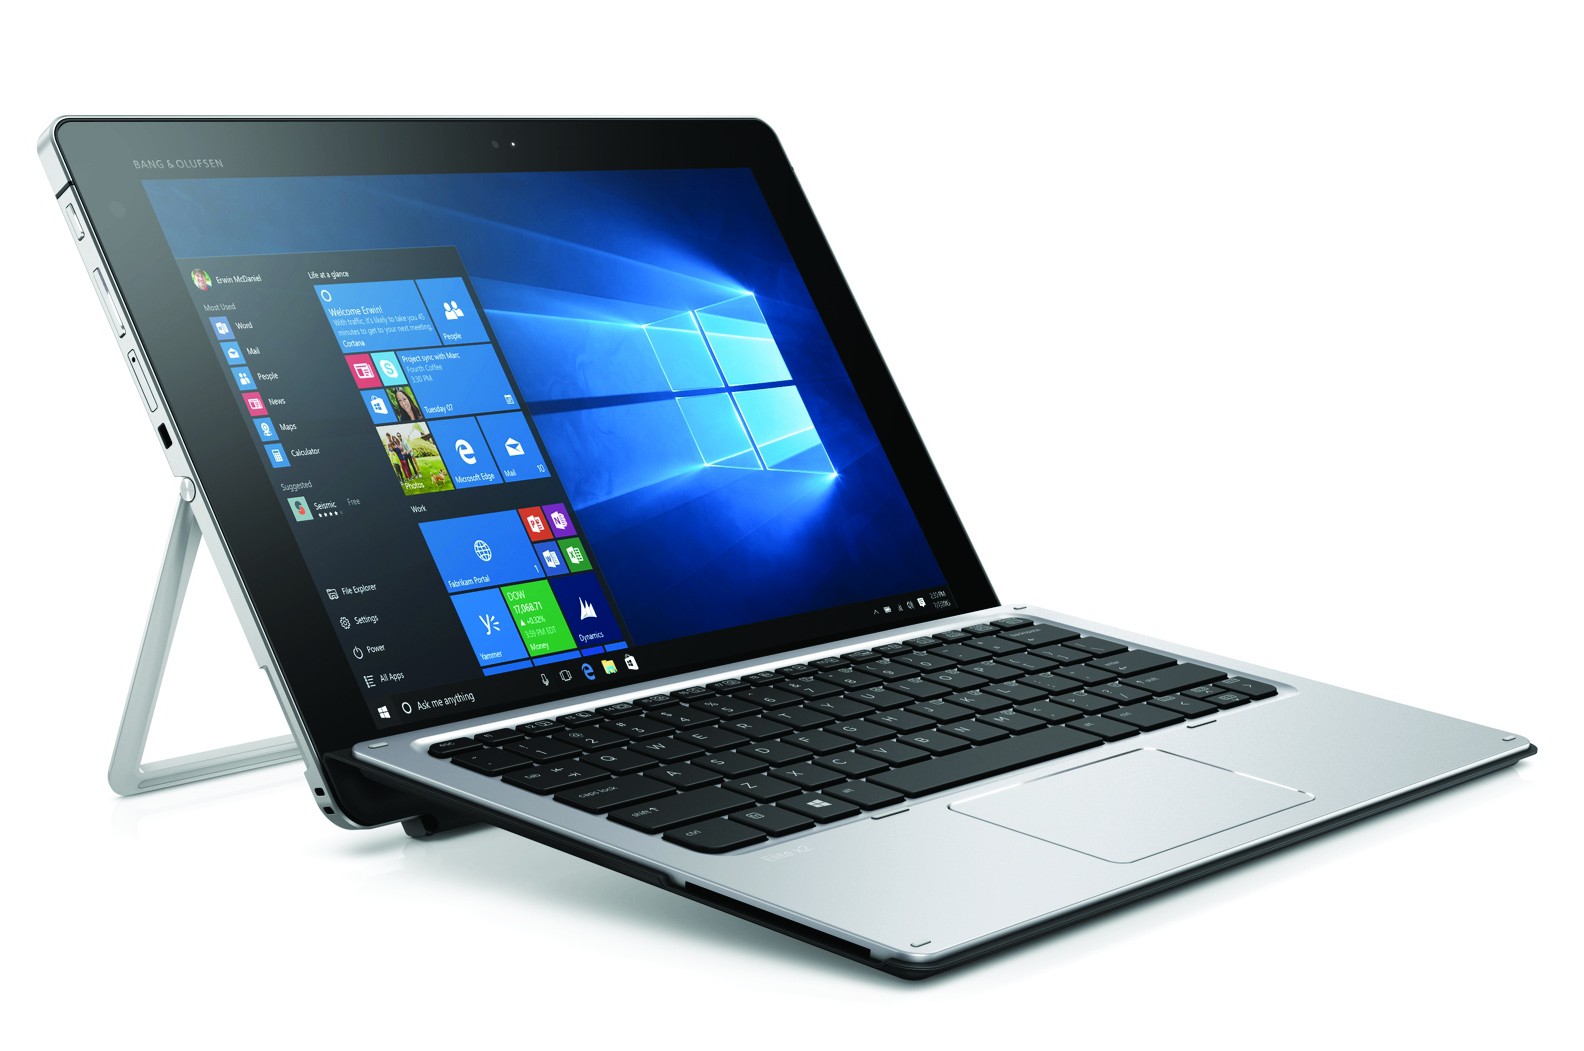 The HP Elite x2 with Windows 10 offers productivity of a full notebook and convenience of a tablet.